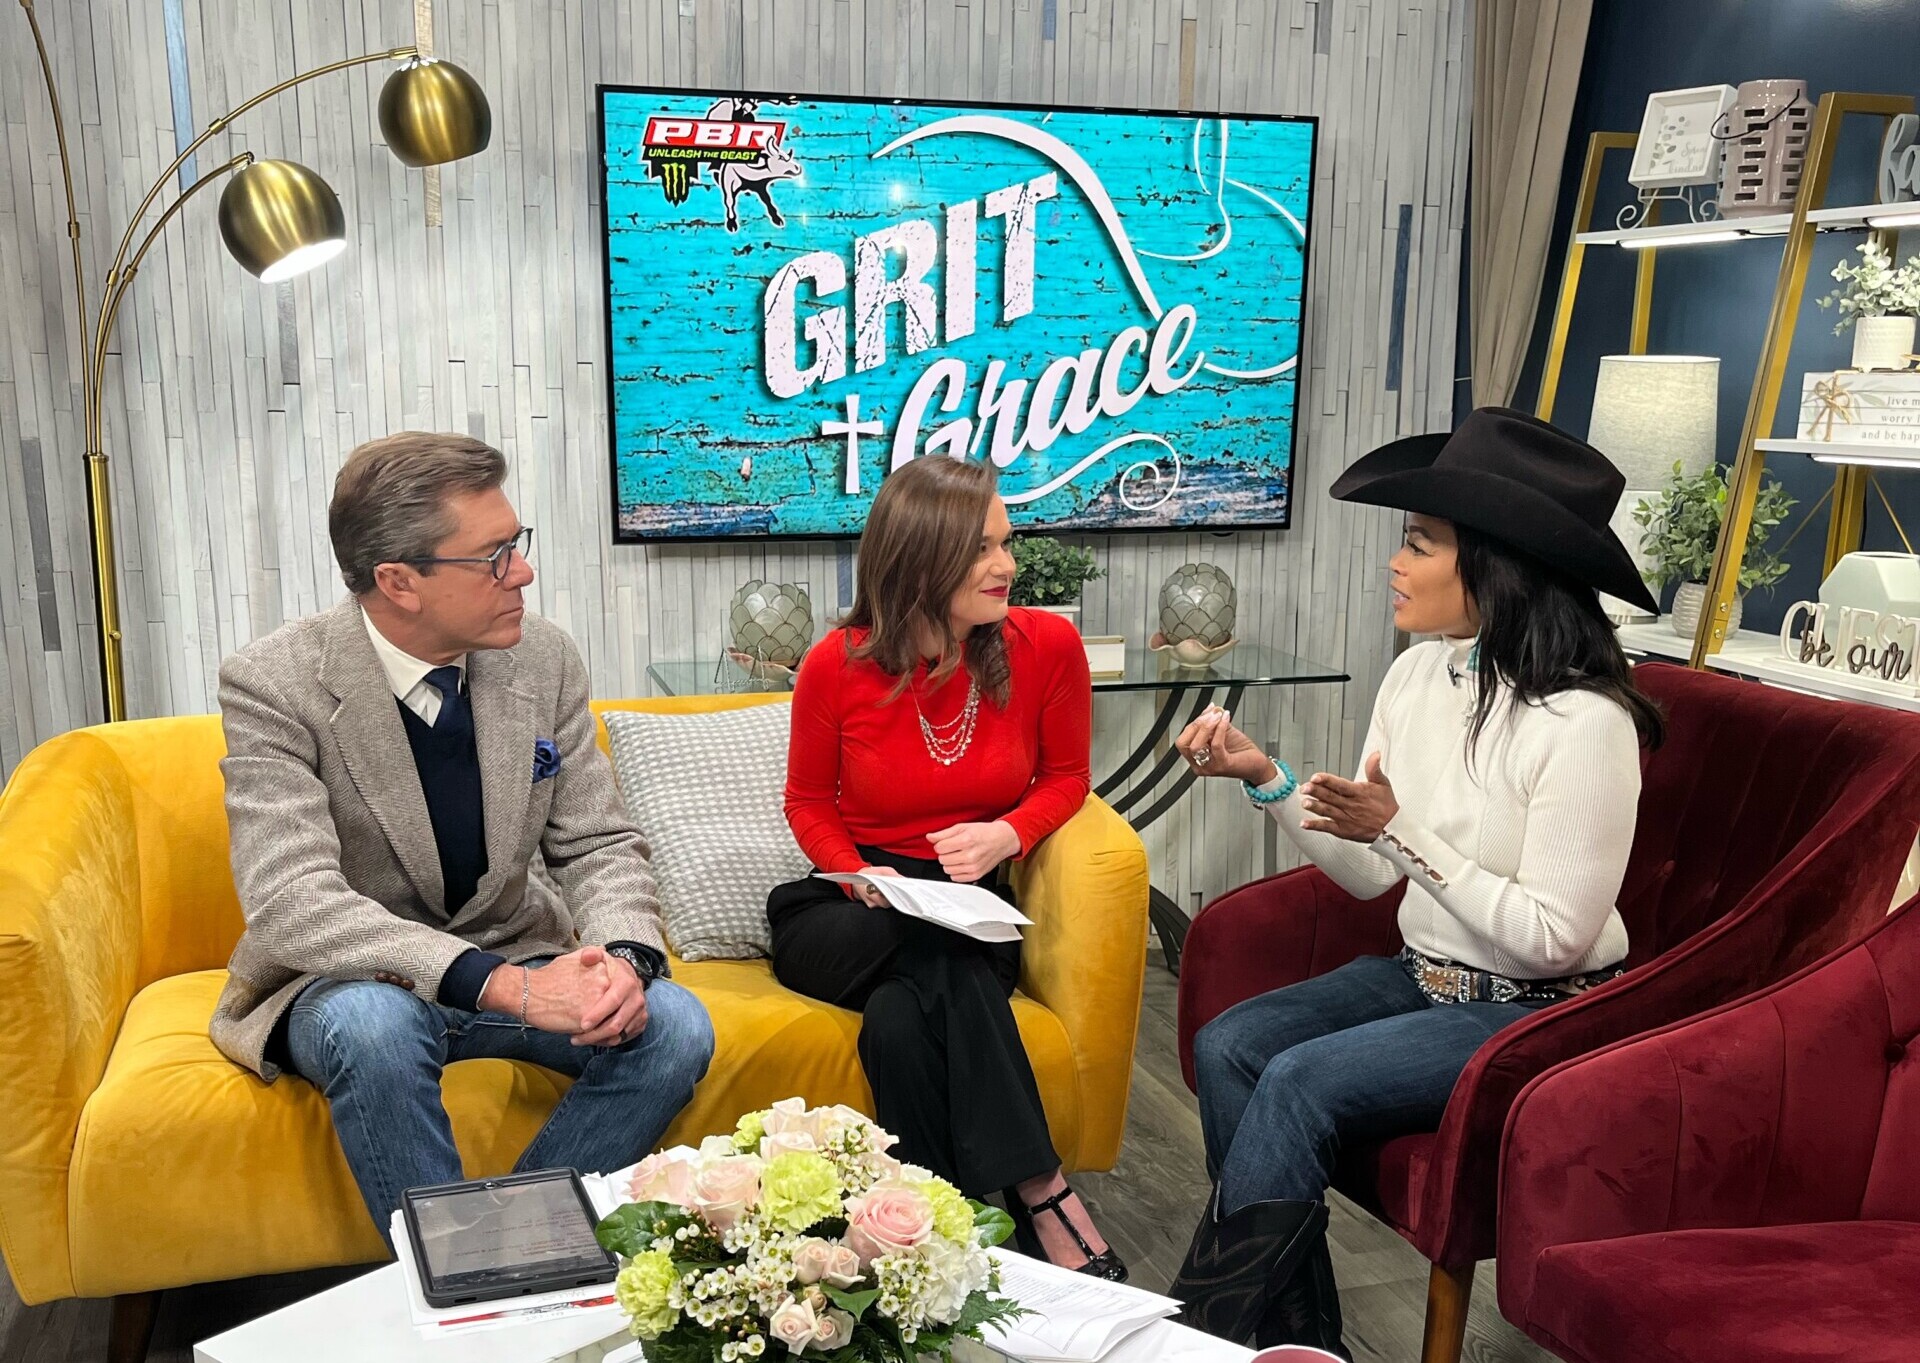 Grit and Grace Nation to hold inaugural celebrity gala